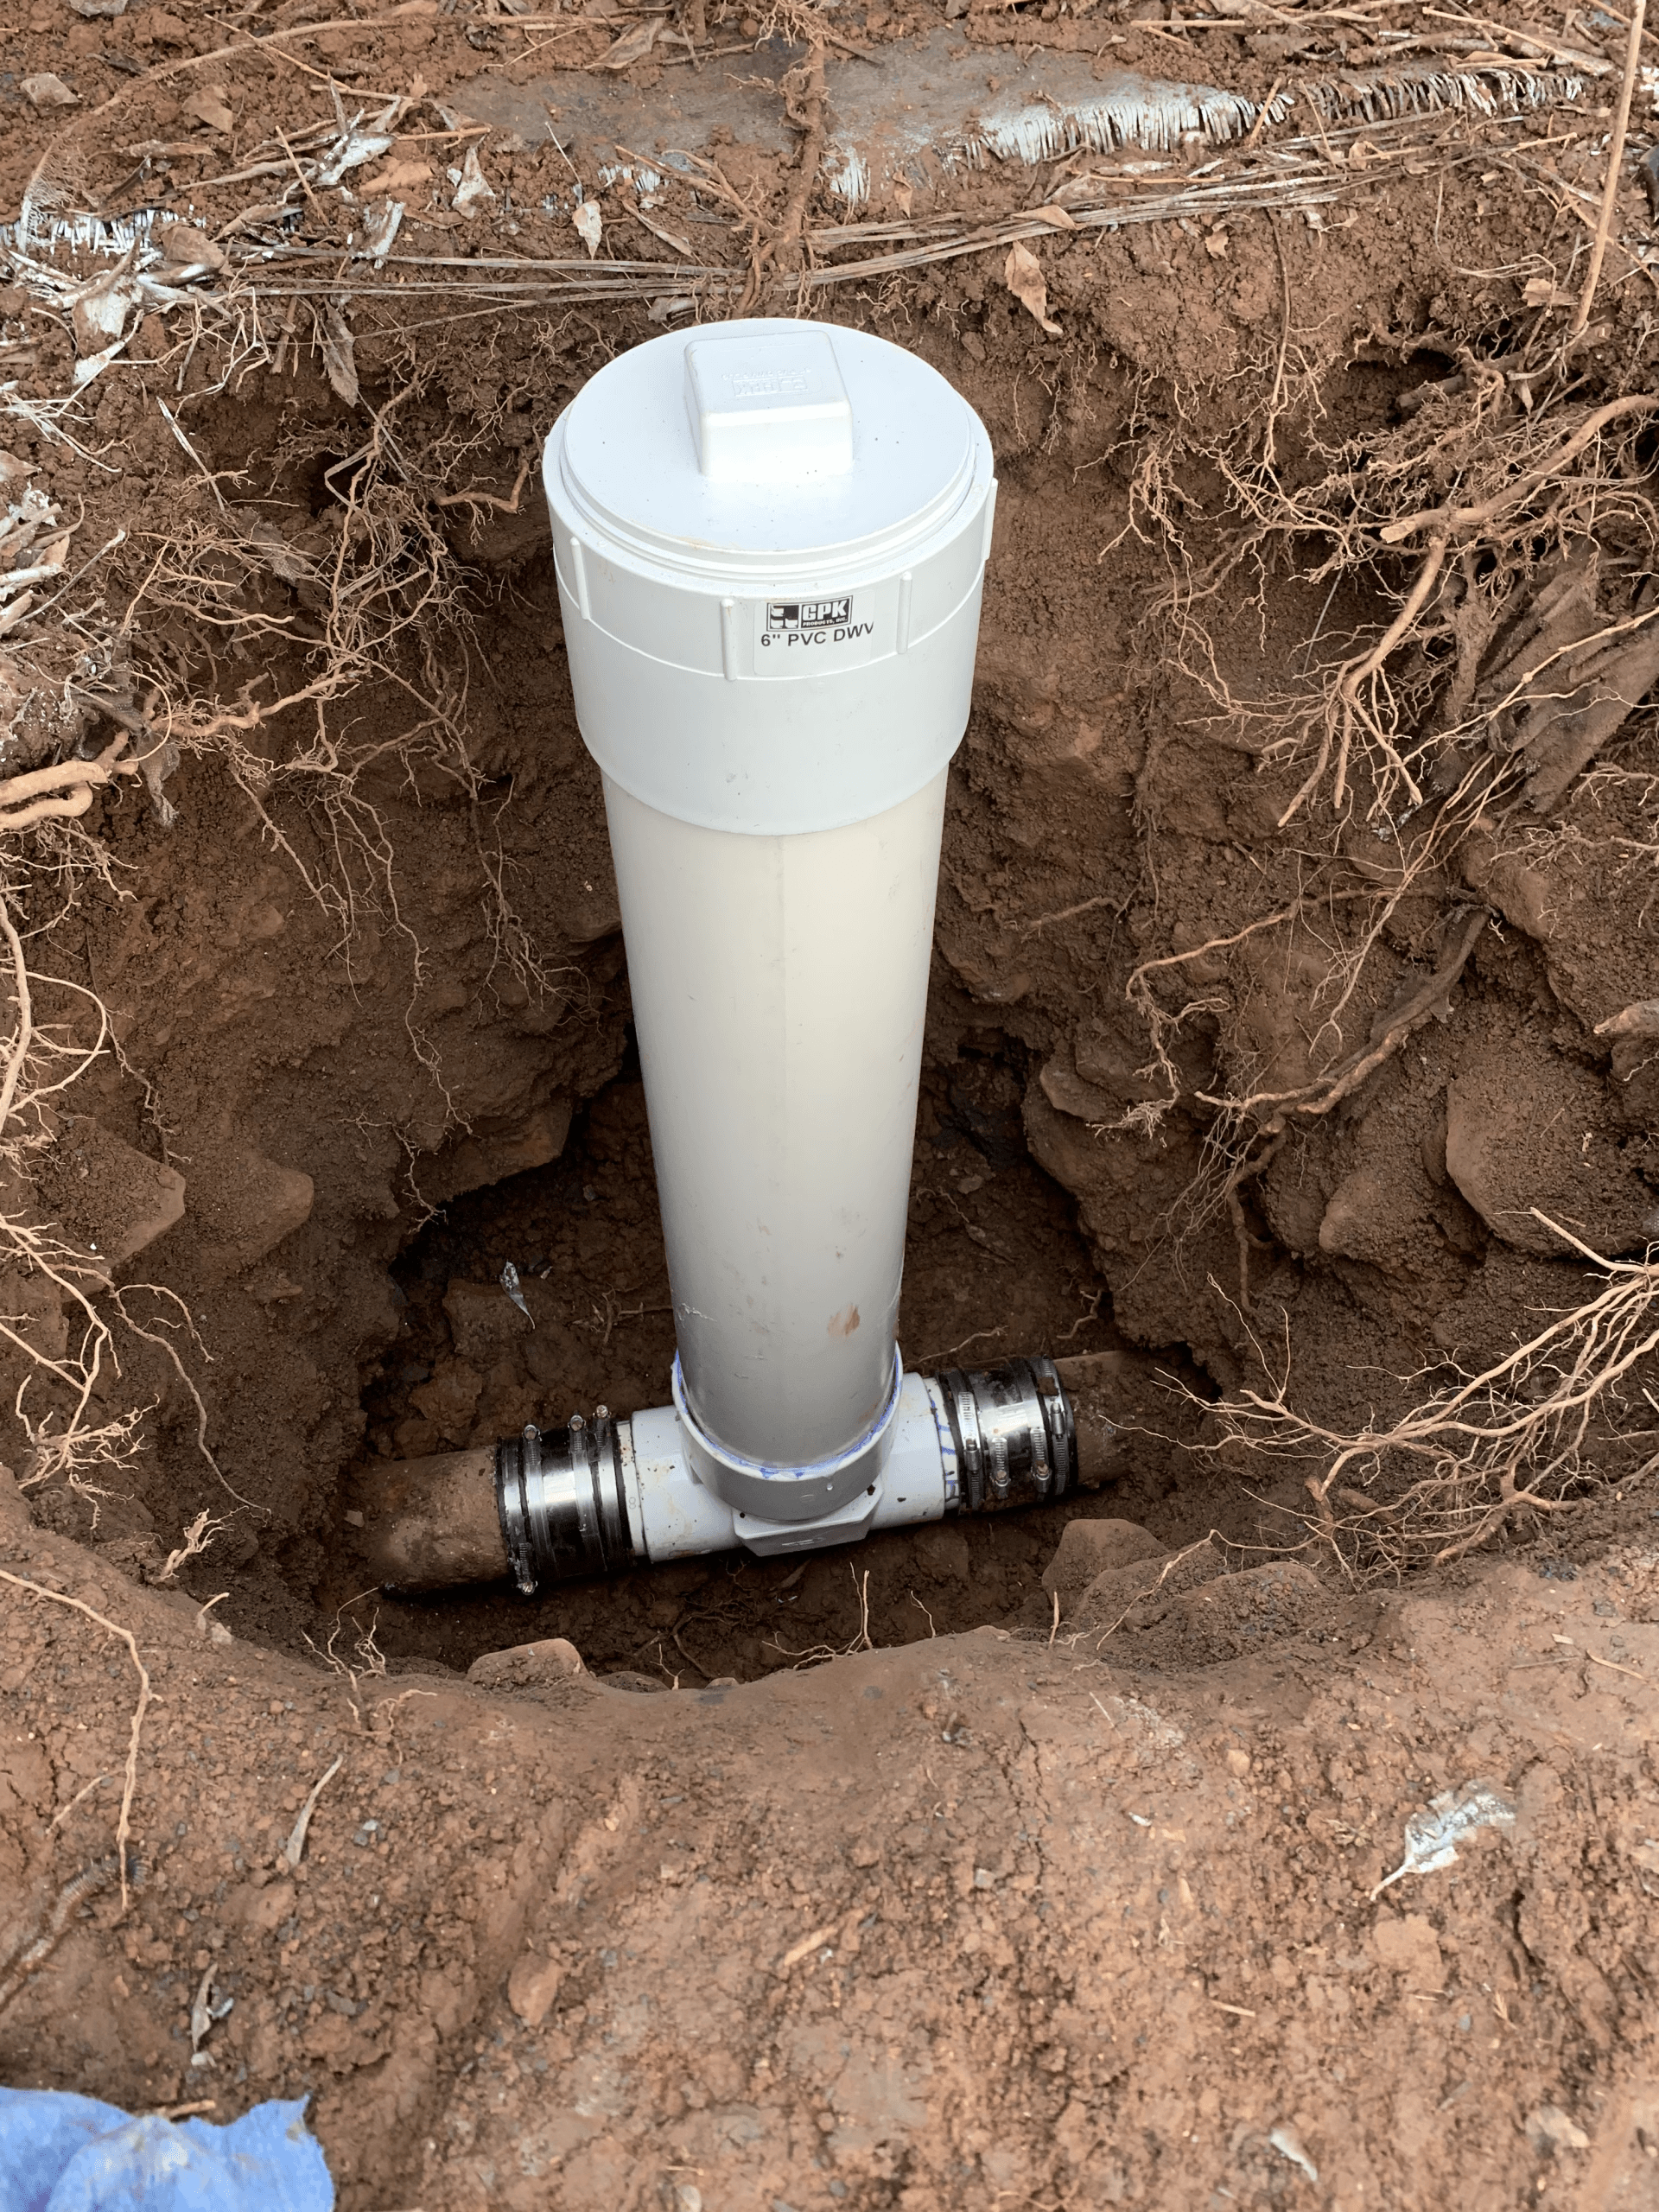 A white pipe is sitting in the middle of a hole in the ground.